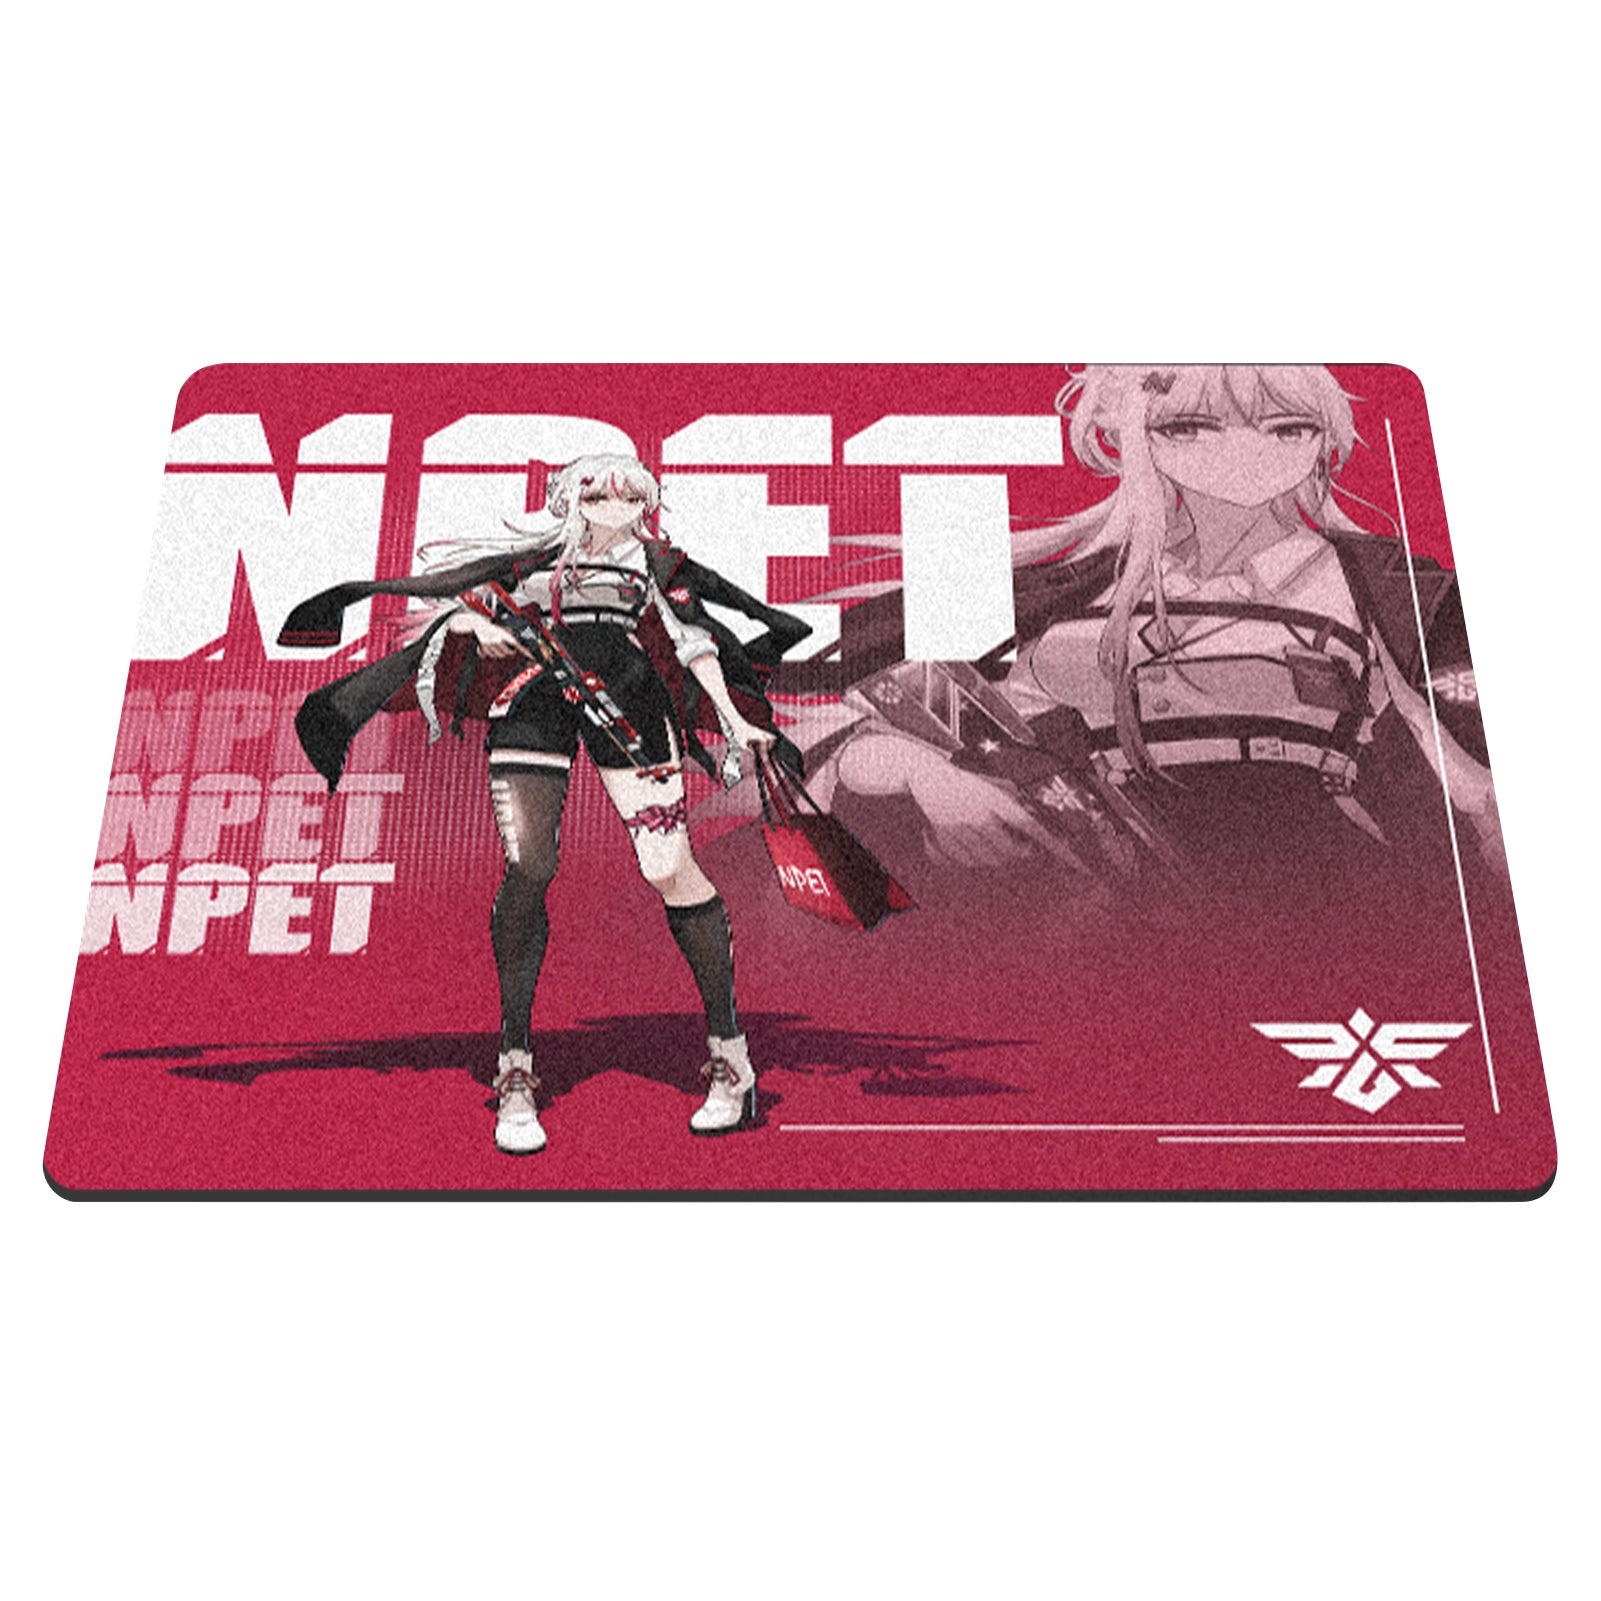 NPET SPEEDM Gaming Mousepad - Resin Surface Hard Gaming Mouse pad,Balanced Control & Speed, No Smell Waterproof Mouse Mat for Esports Gamers [Hard/Fast] Red-Rukia, Large